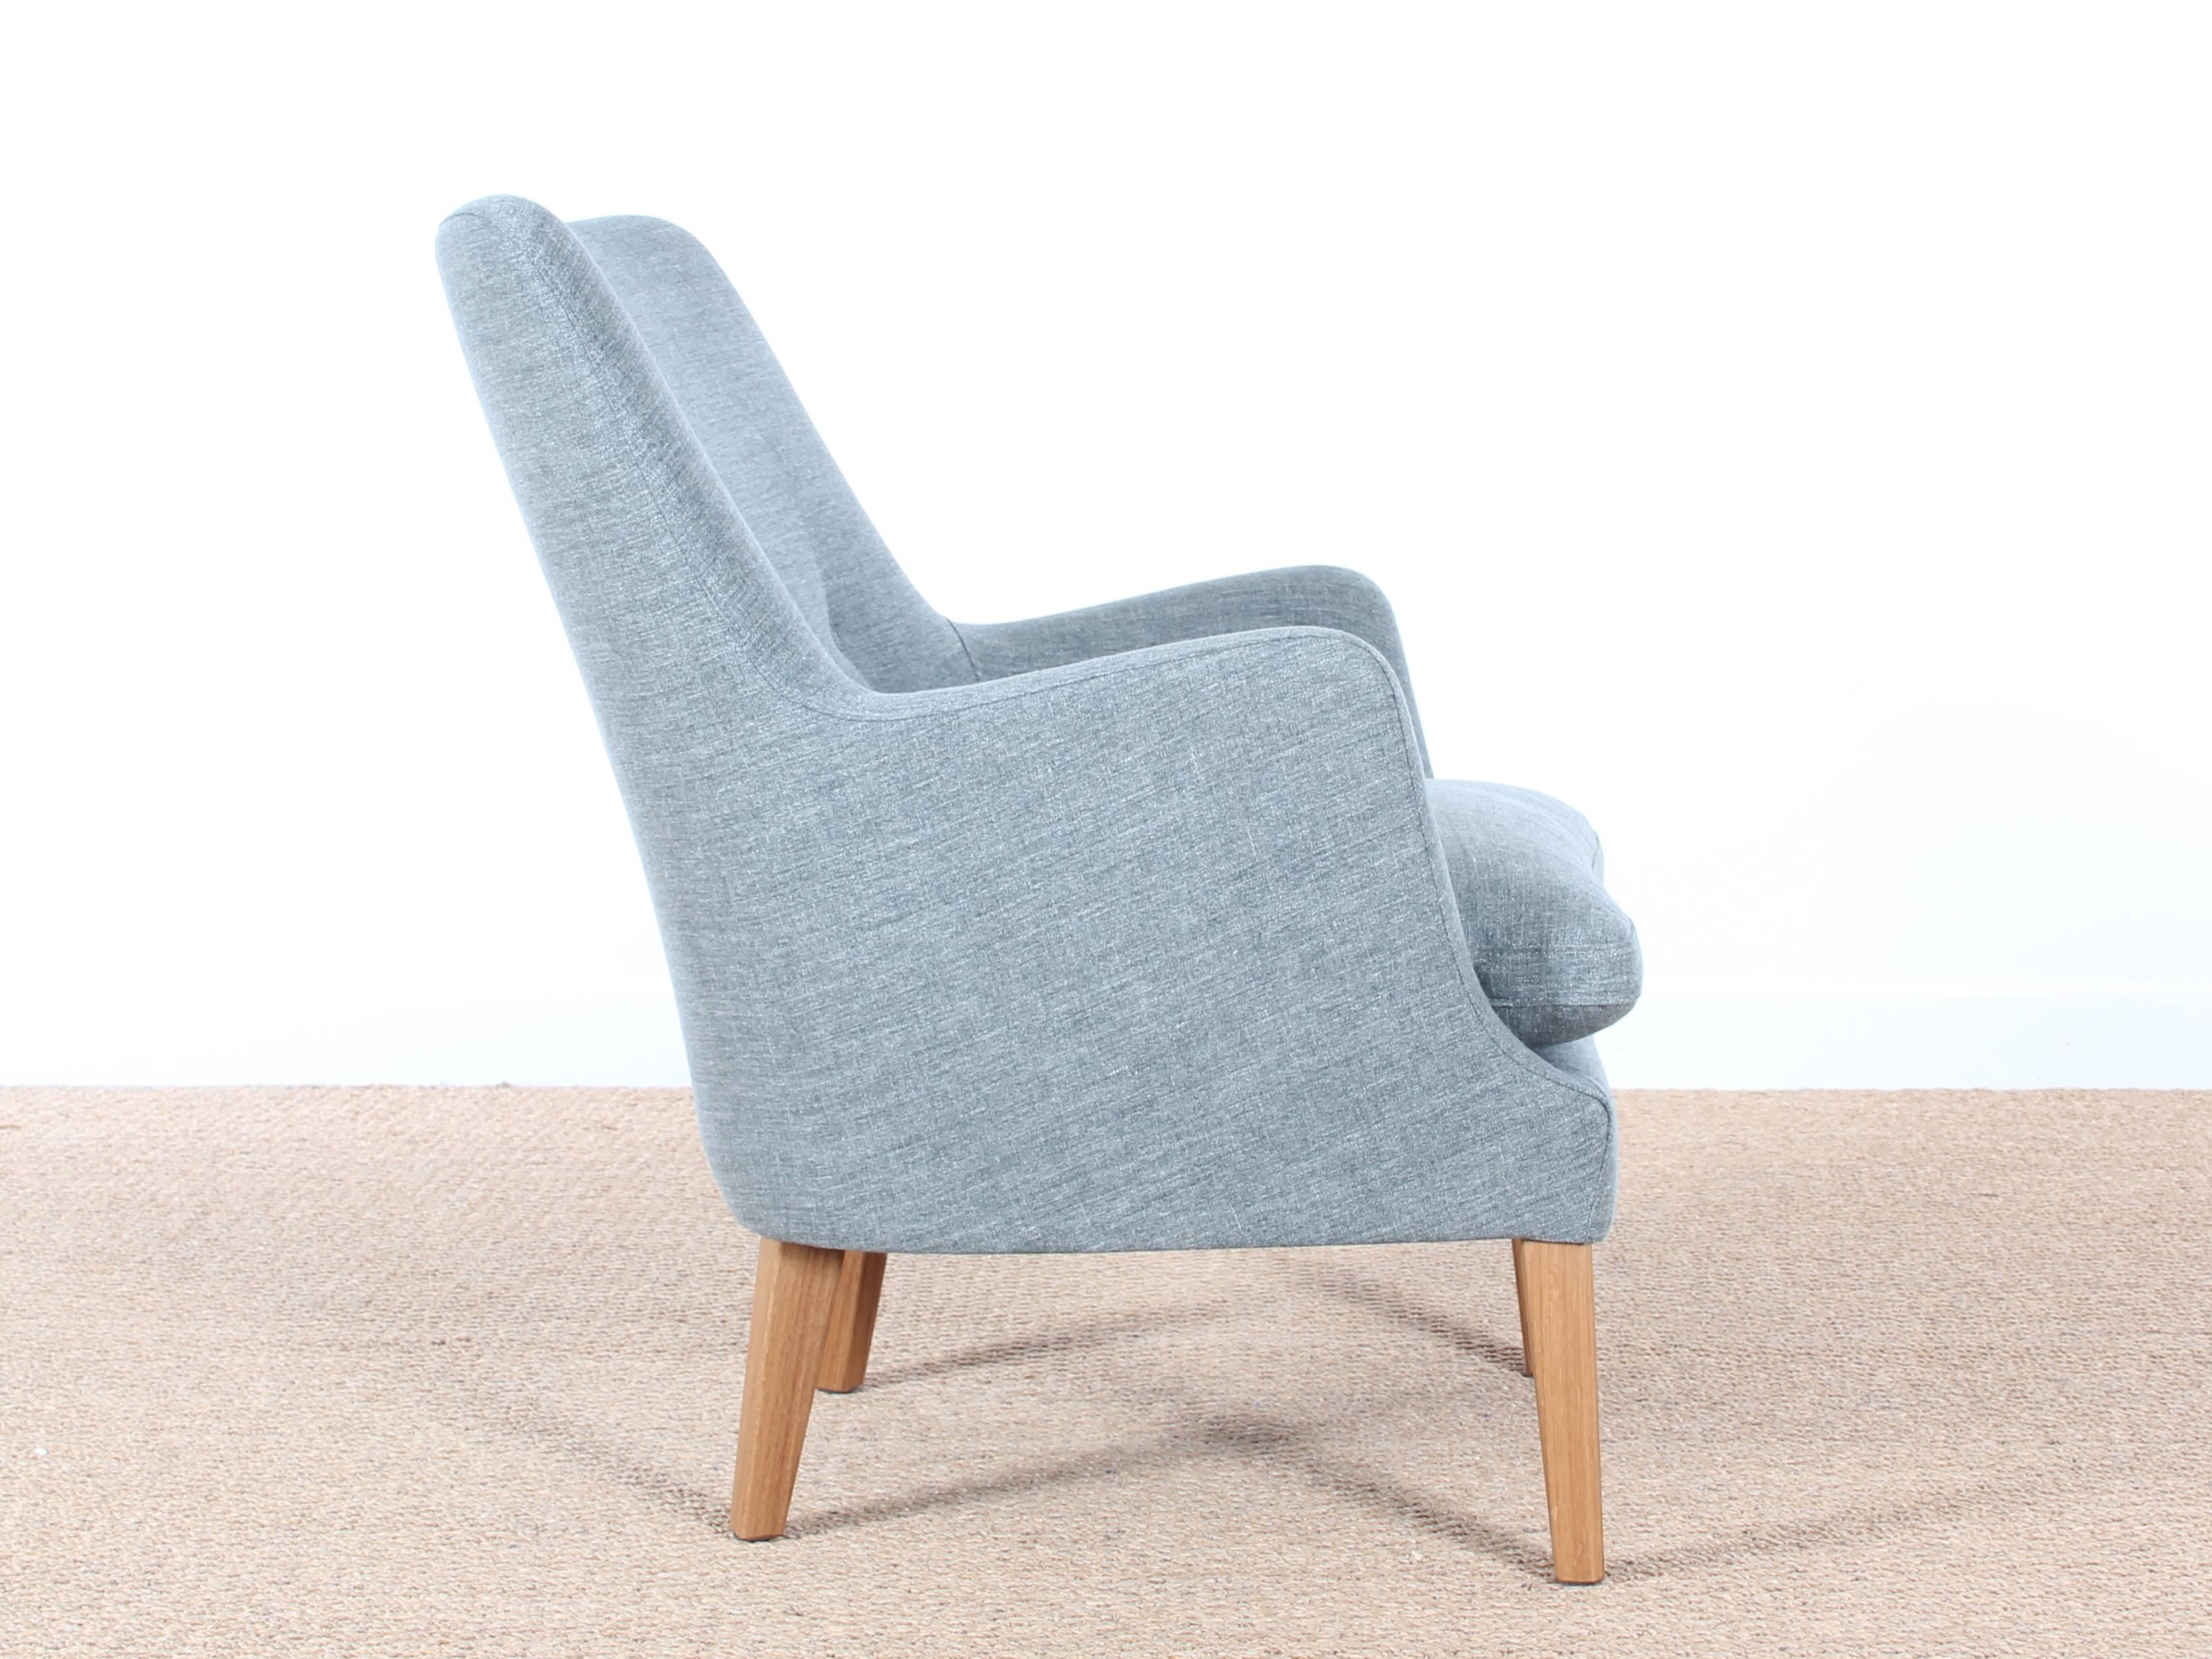 Mid-Century Modern Scandinavian lounge chair by Arne Vodder AV 53 new release. On demand only. Delivery time: 6 weeks. Available in three different fabrics. Samples on demand.
New release on demand.